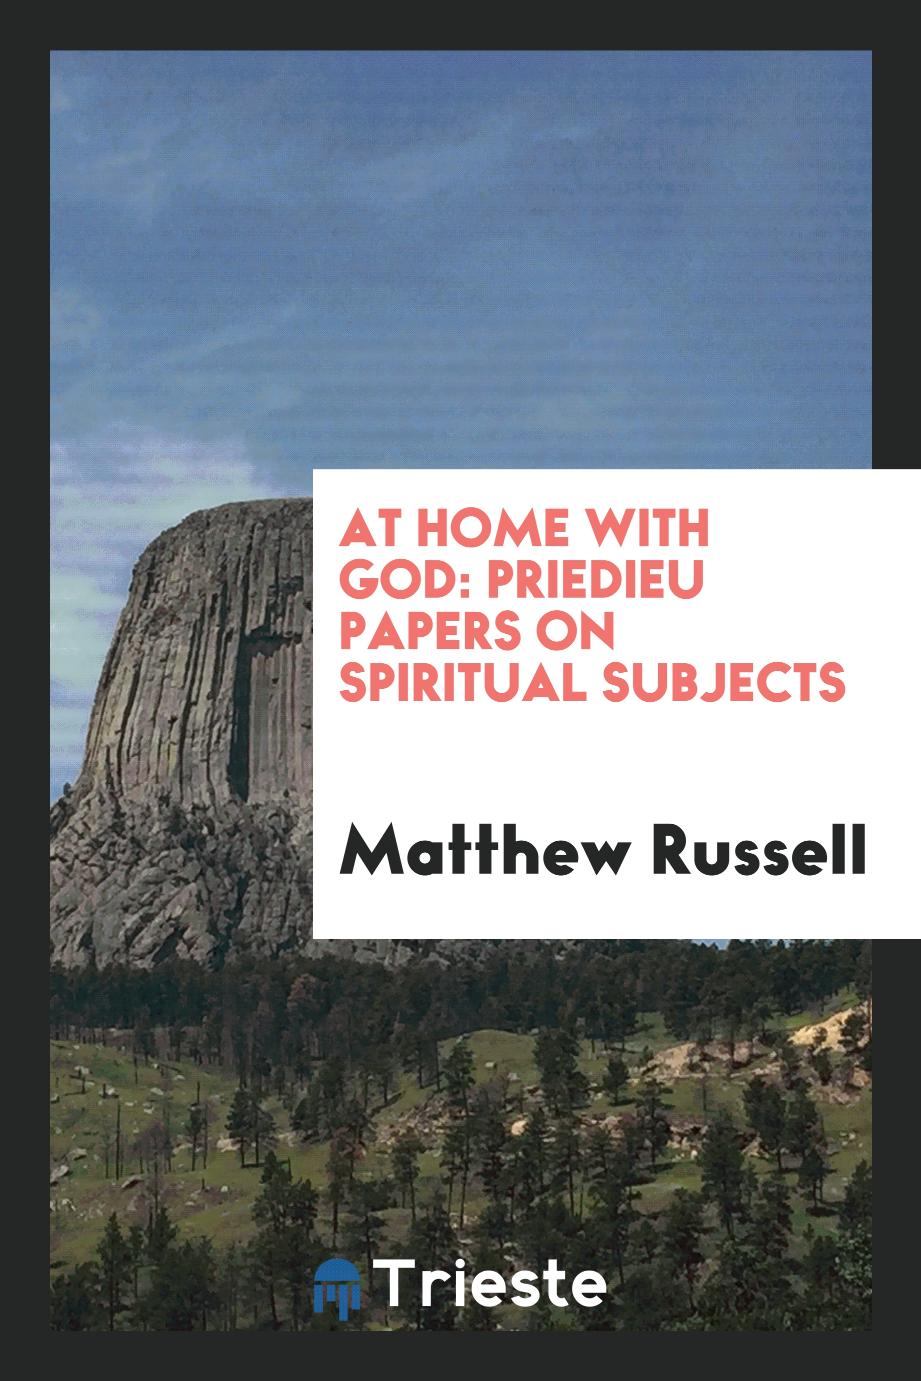 At home with God: priedieu papers on spiritual subjects